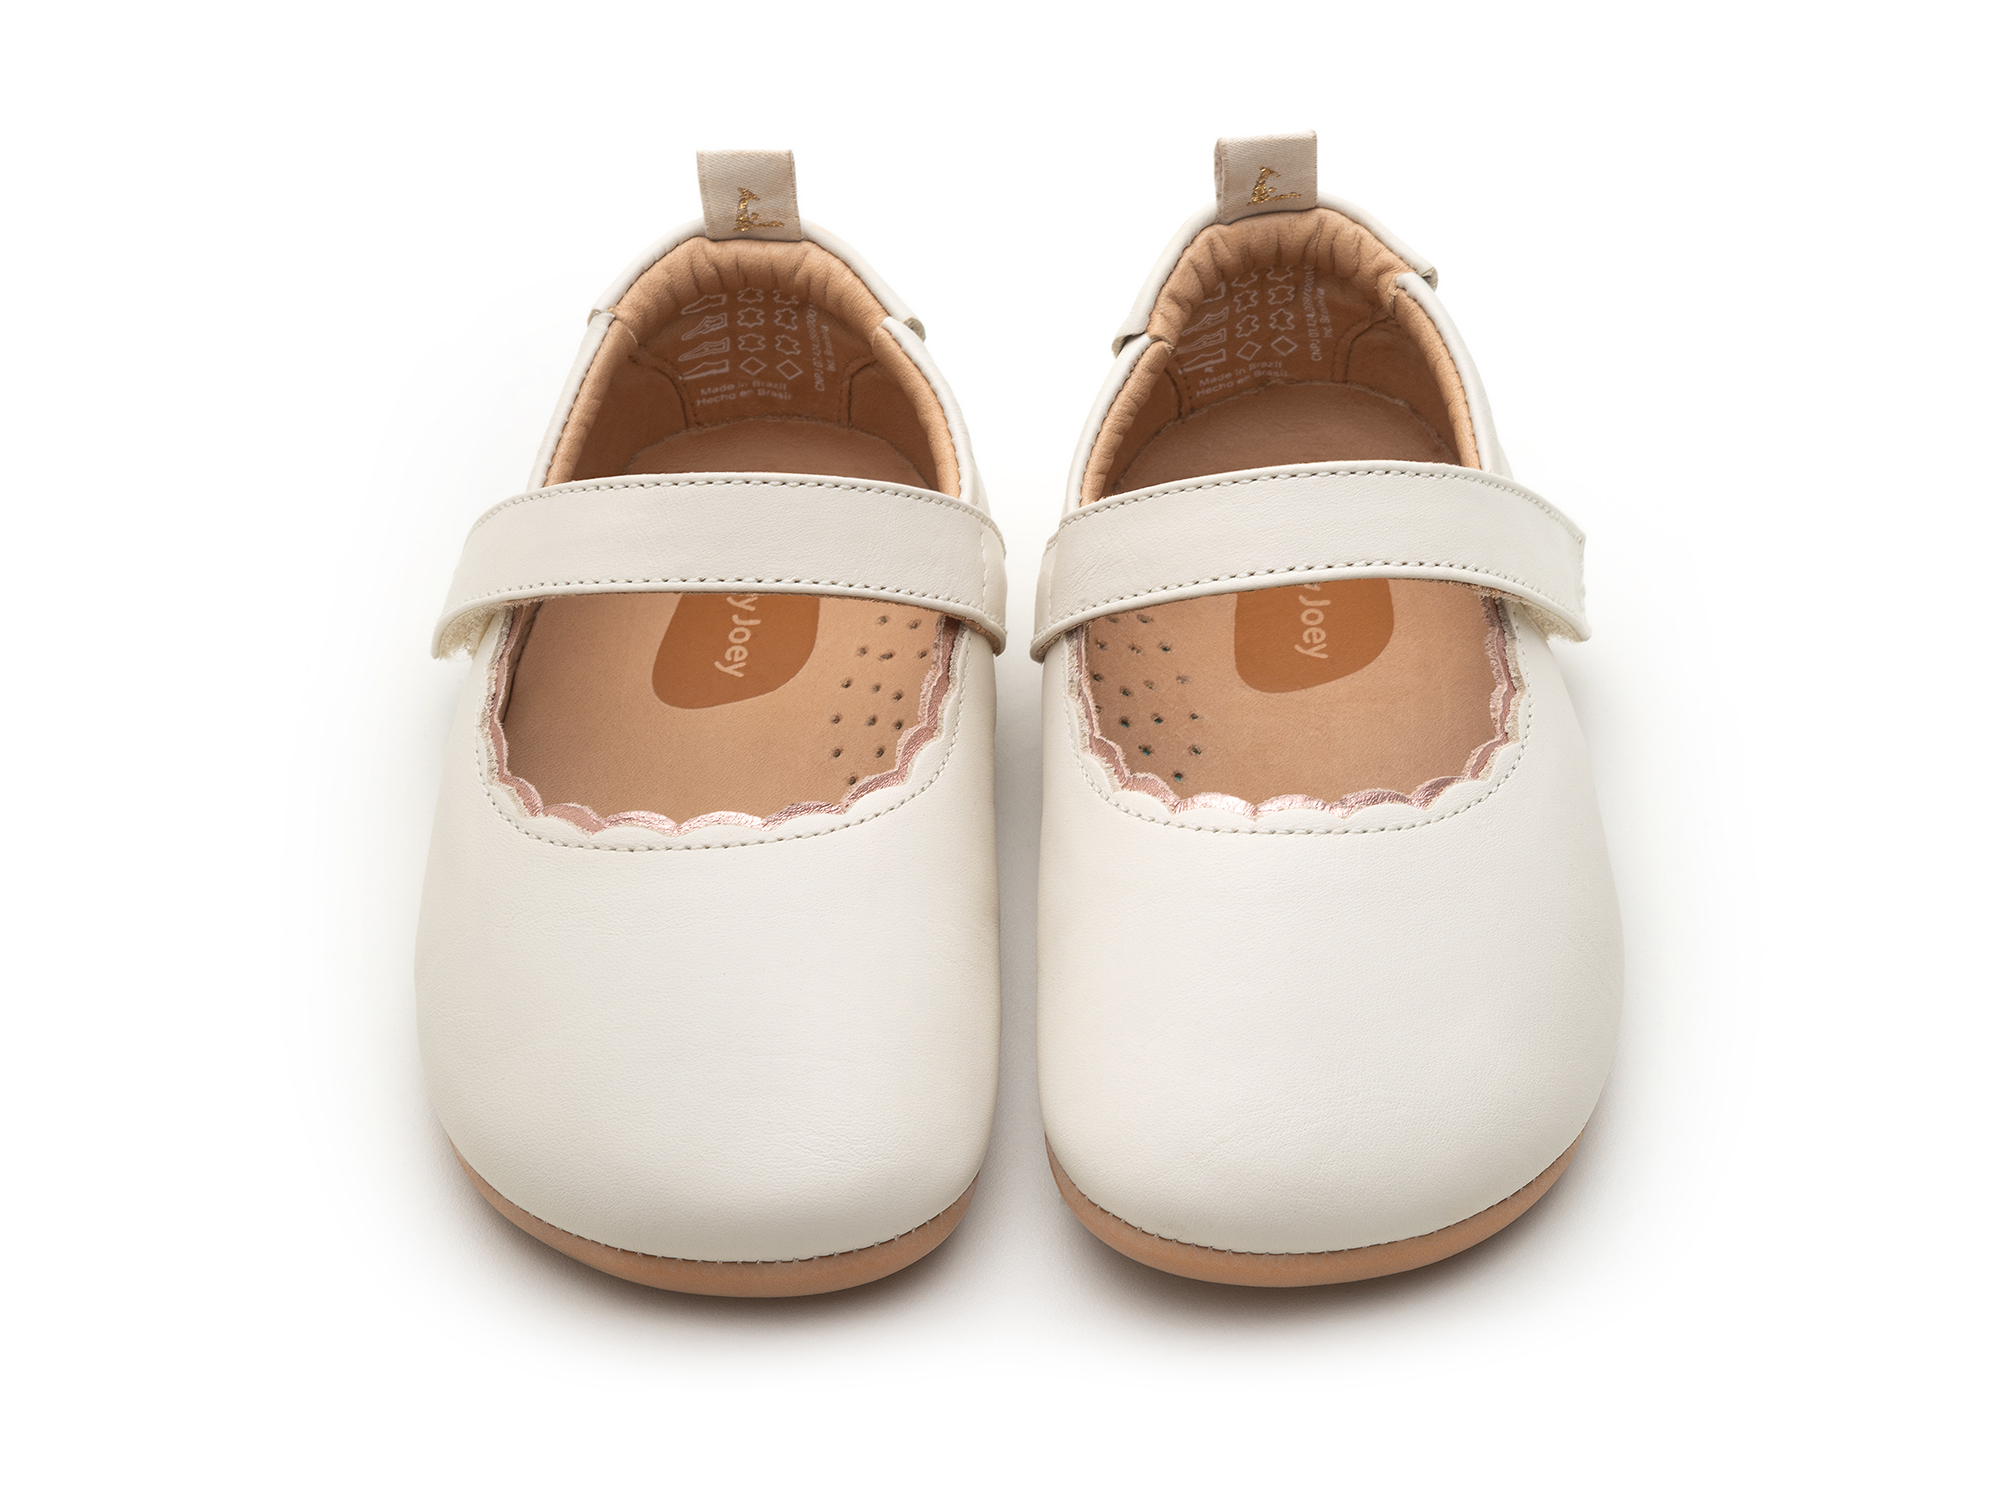 UP & GO Mary Janes for Girls Roundy | Tip Toey Joey - Australia - 6